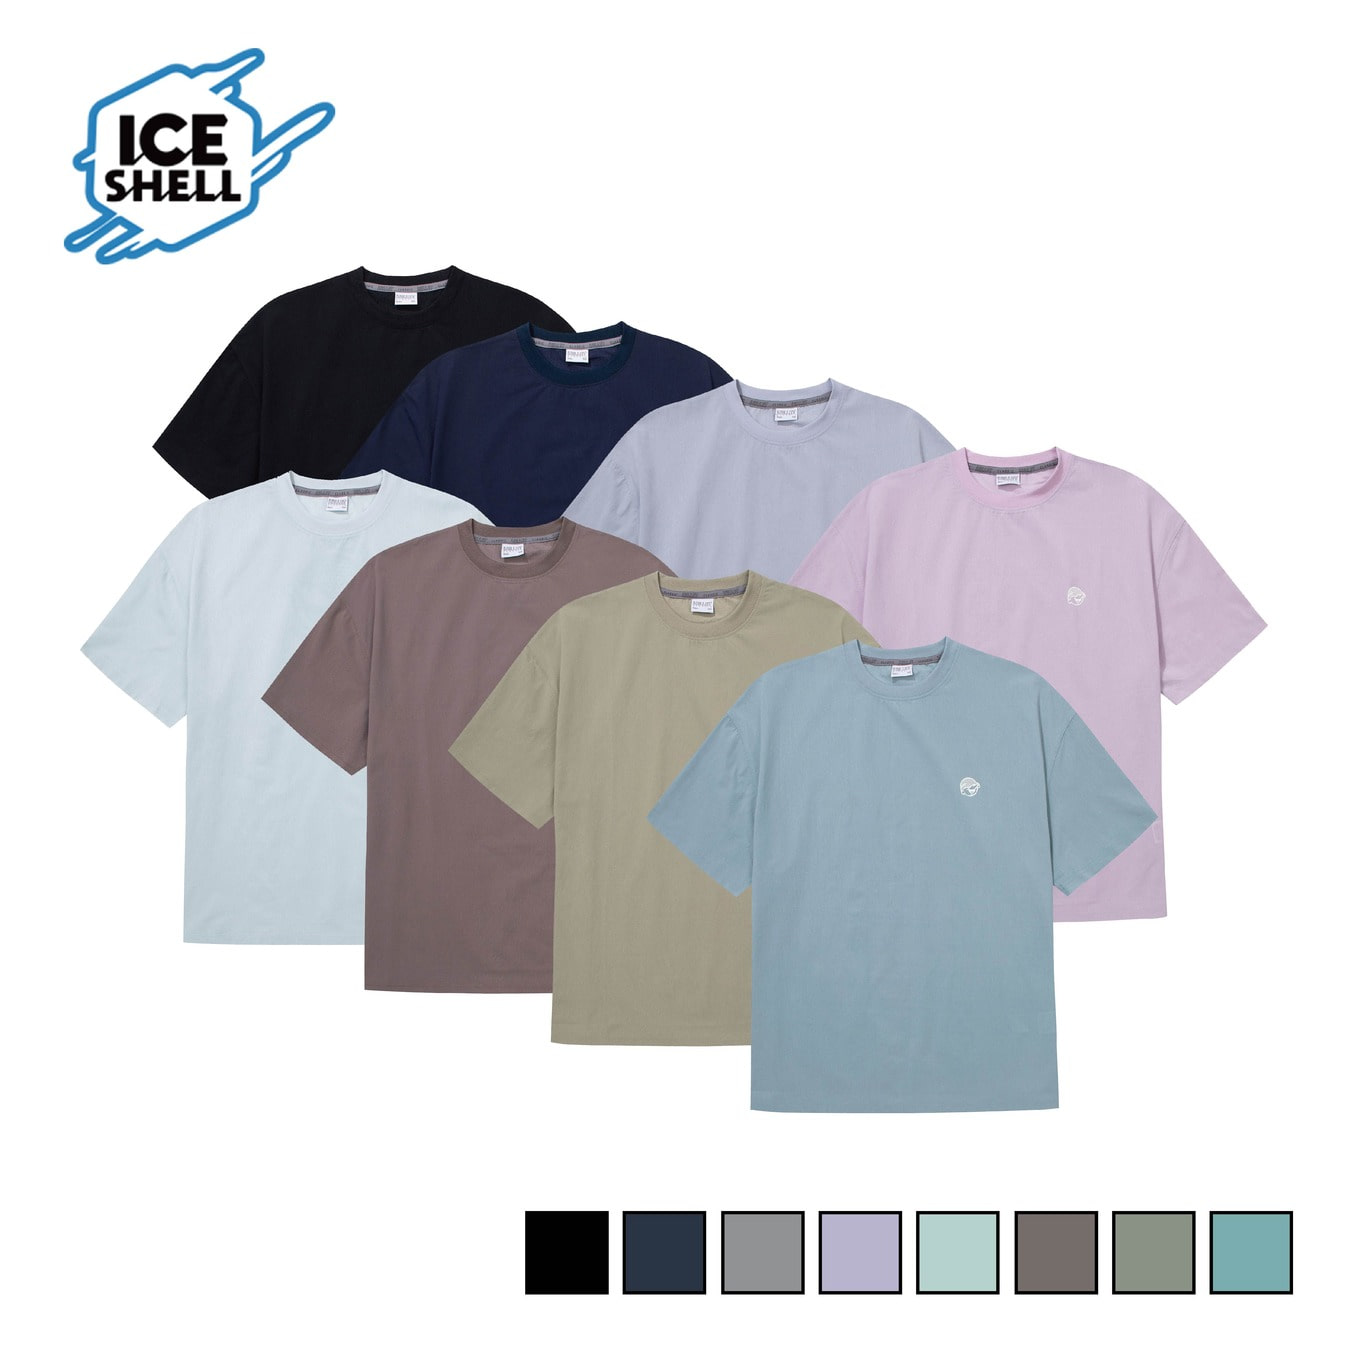 MCC CENTER LOGO ICE SHELL T-SHIRTS_OVER FIT